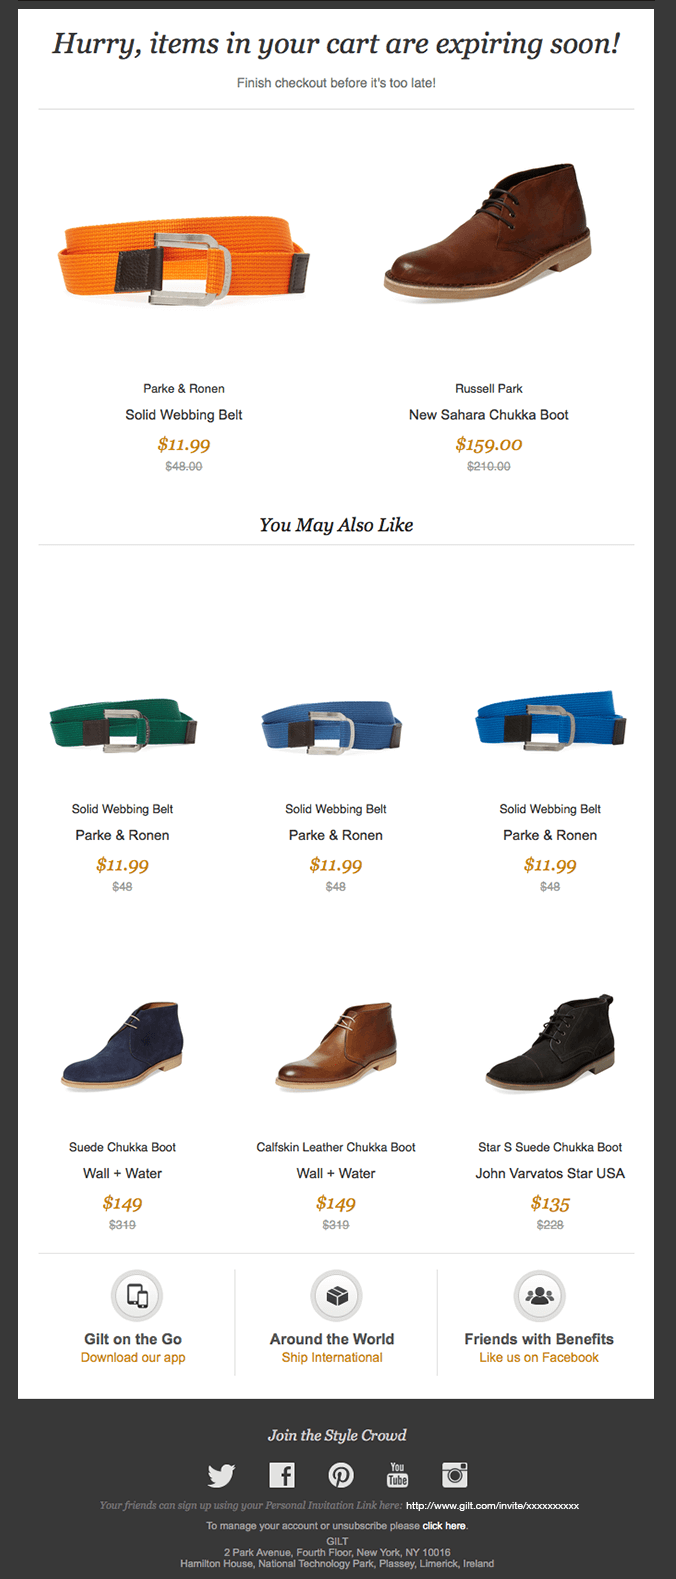 GILT abandoned cart email example